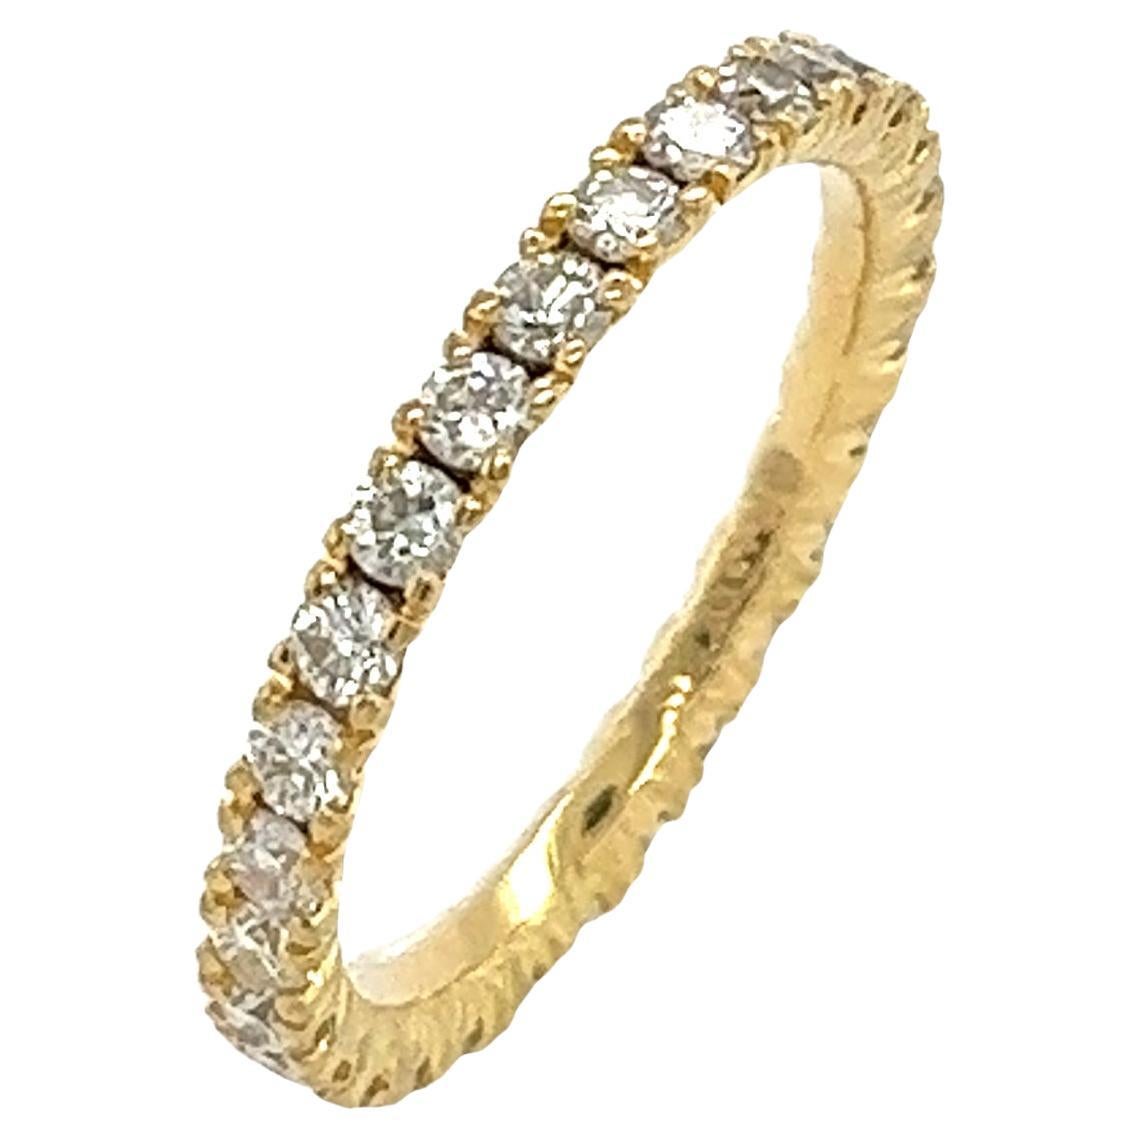 Browns 18ct Yellow Gold Diamond Full Eternity Ring Set With 1.06ct For Sale